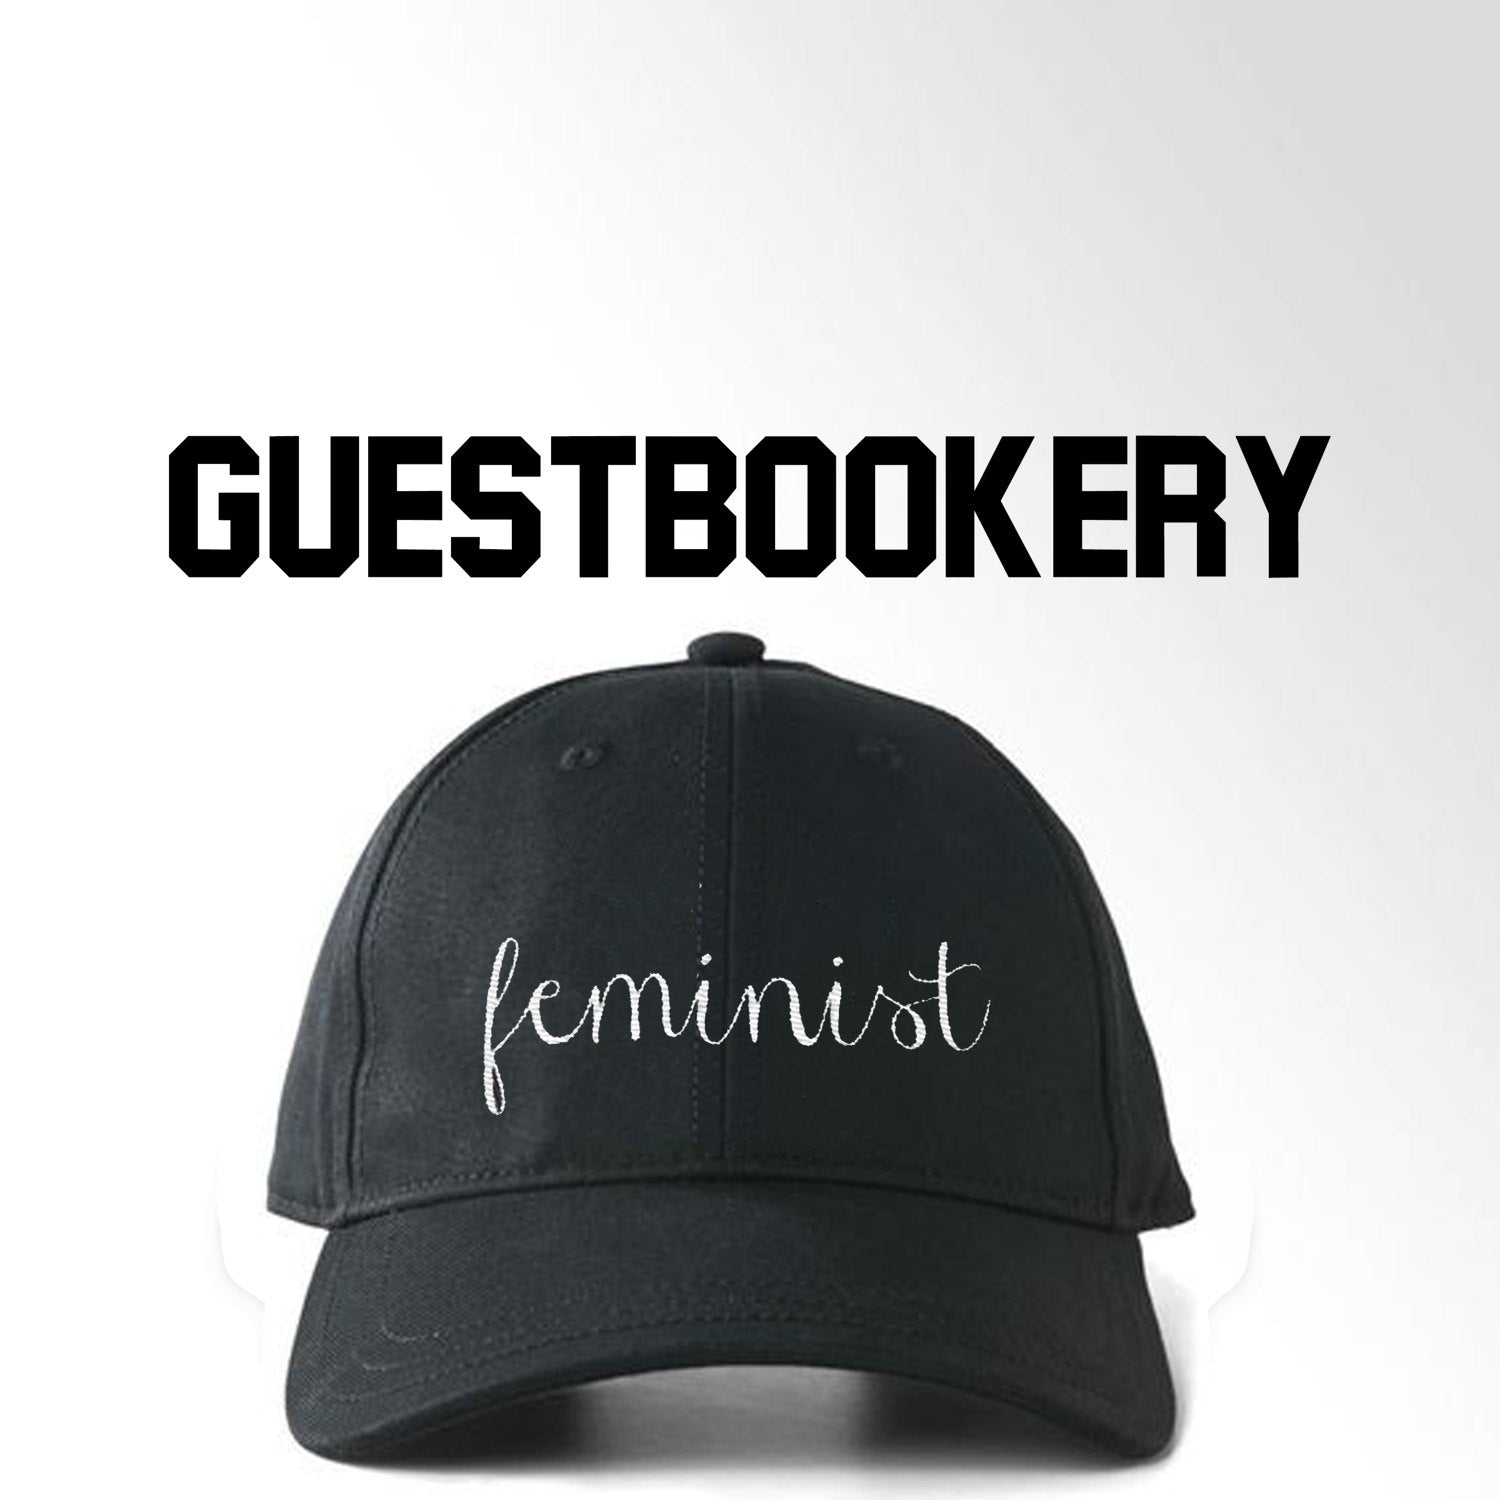 Feminist Hat - Guestbookery